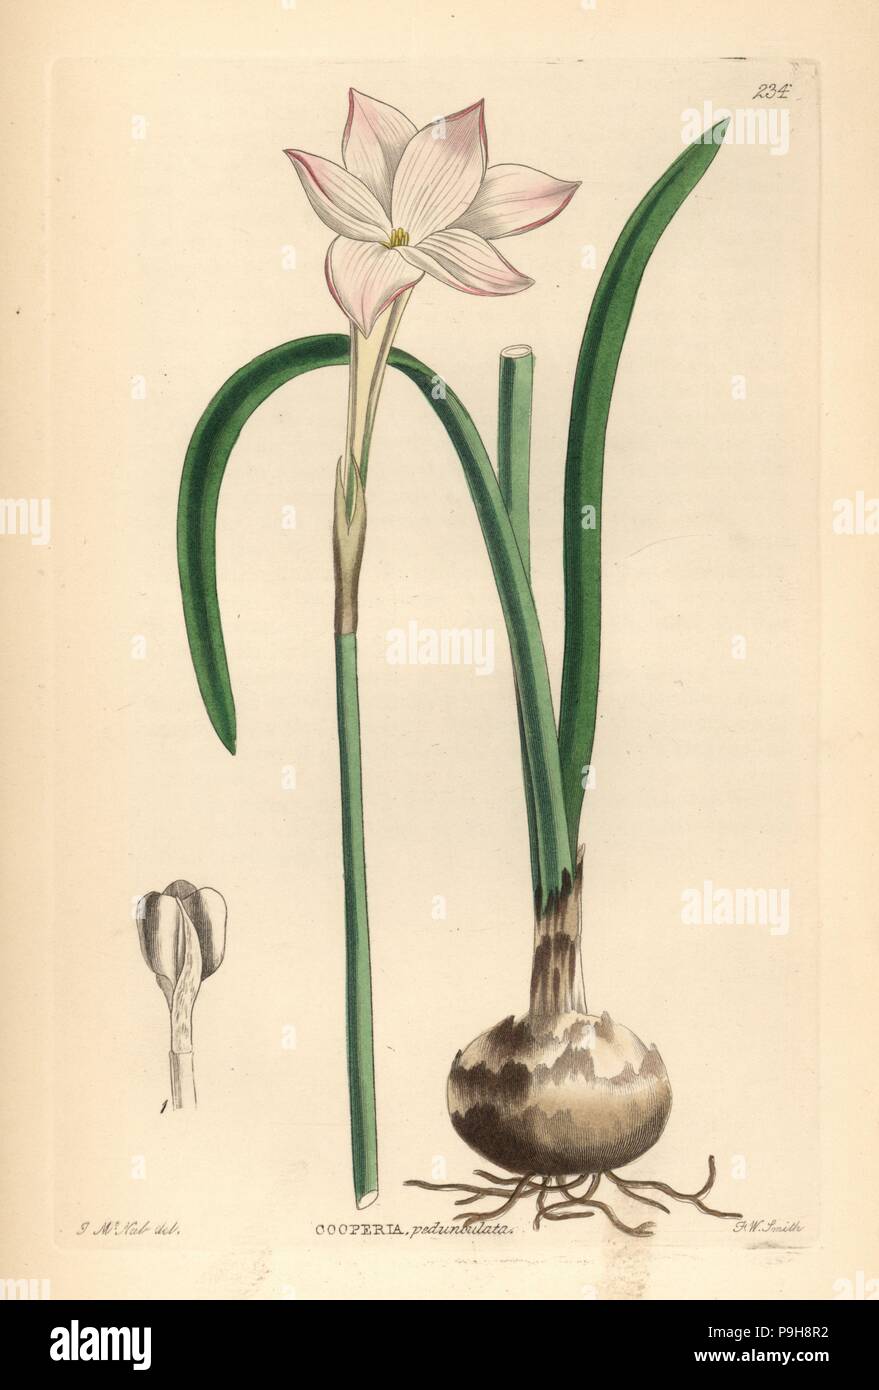 Zephyr lily, Zephyranthes drummondii (Pedunculated cooperia, Cooperia pedunculata). Handcoloured copperplate engraving by Frederick W. Smith after J. McNab from John Lindley and Robert Sweet's Ornamental Flower Garden and Shrubbery, G. Willis, London, 1854. Stock Photo